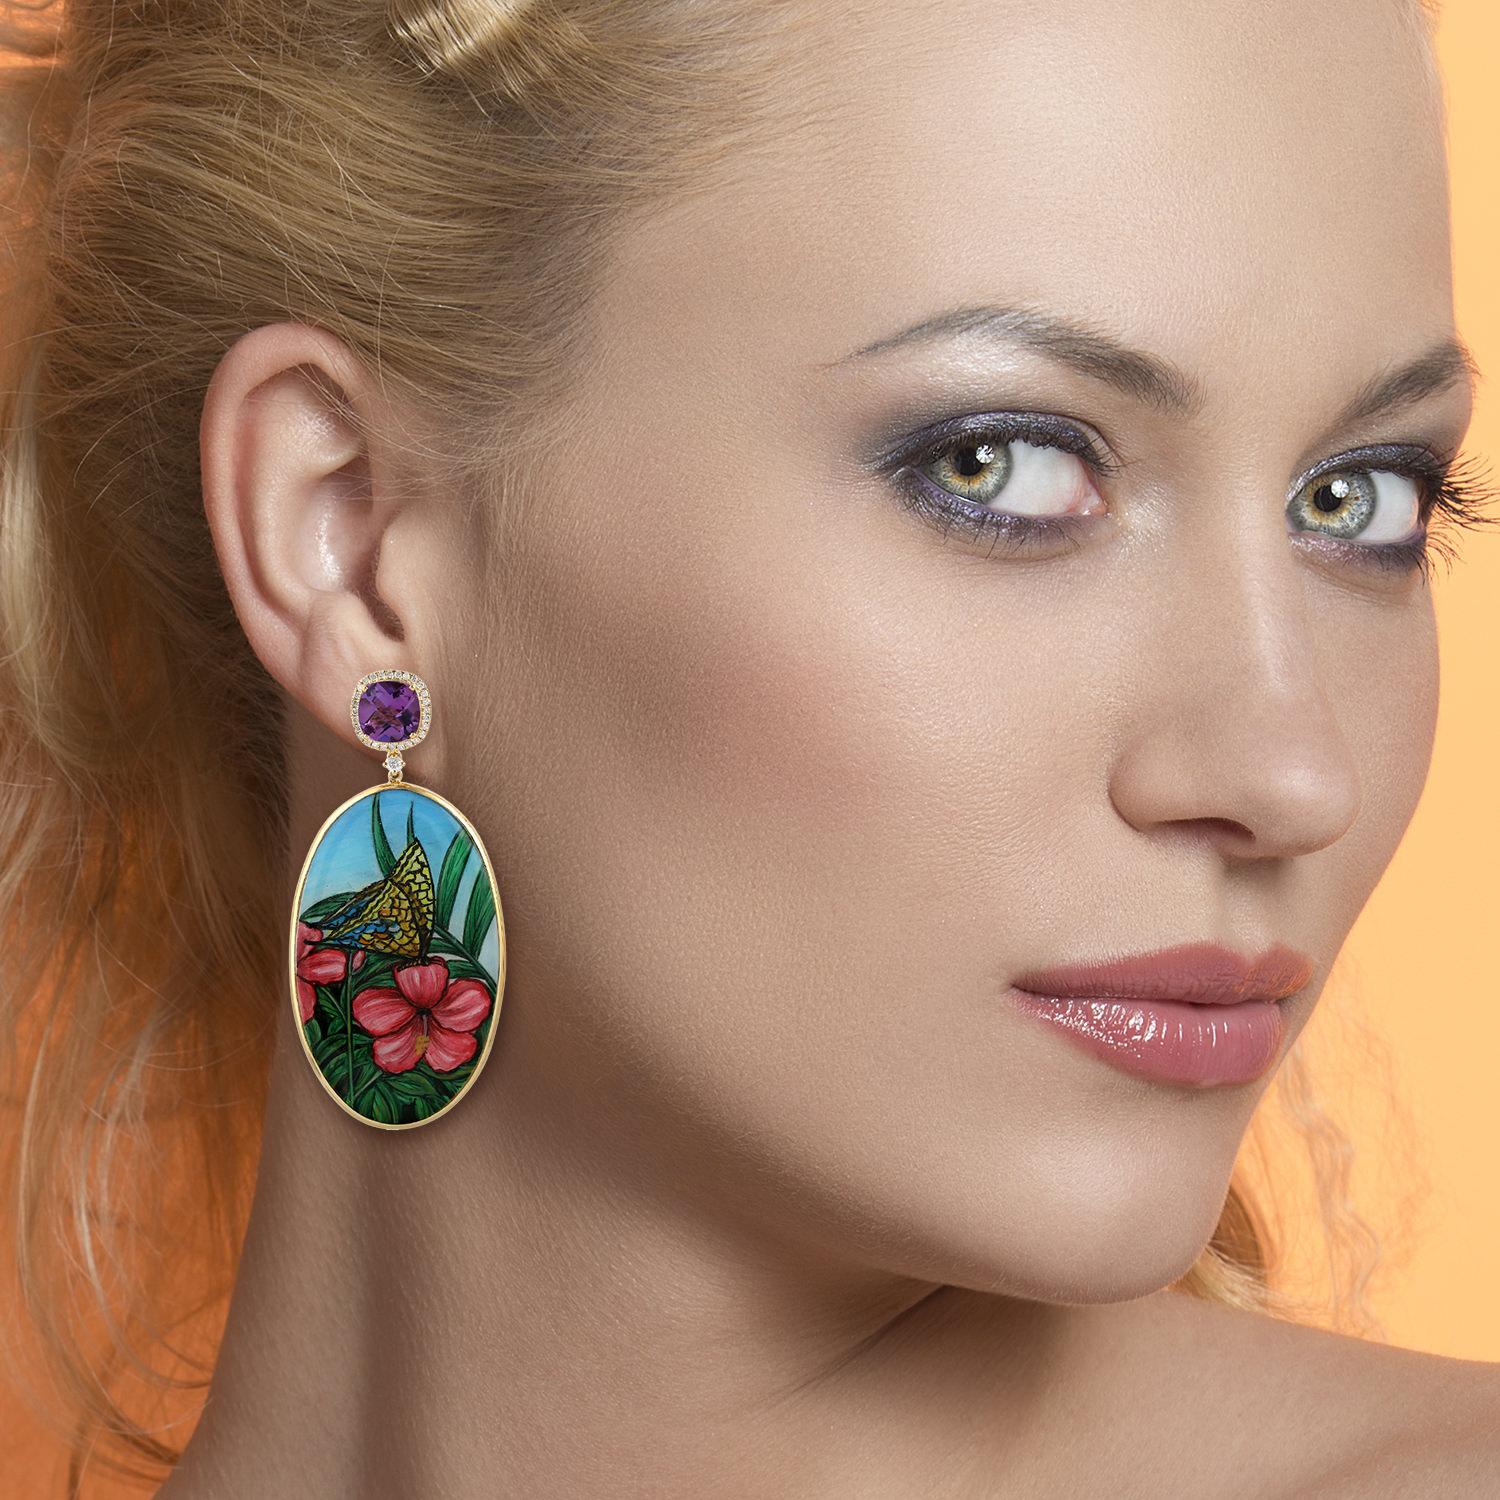 Cast in 18 Karat Gold. These beautiful earrings features unique hand painted miniature art set with 45.76 carats bakelite, 5.27 carats amethyst & 0.50 carats diamonds.

FOLLOW  MEGHNA JEWELS storefront to view the latest collection & exclusive